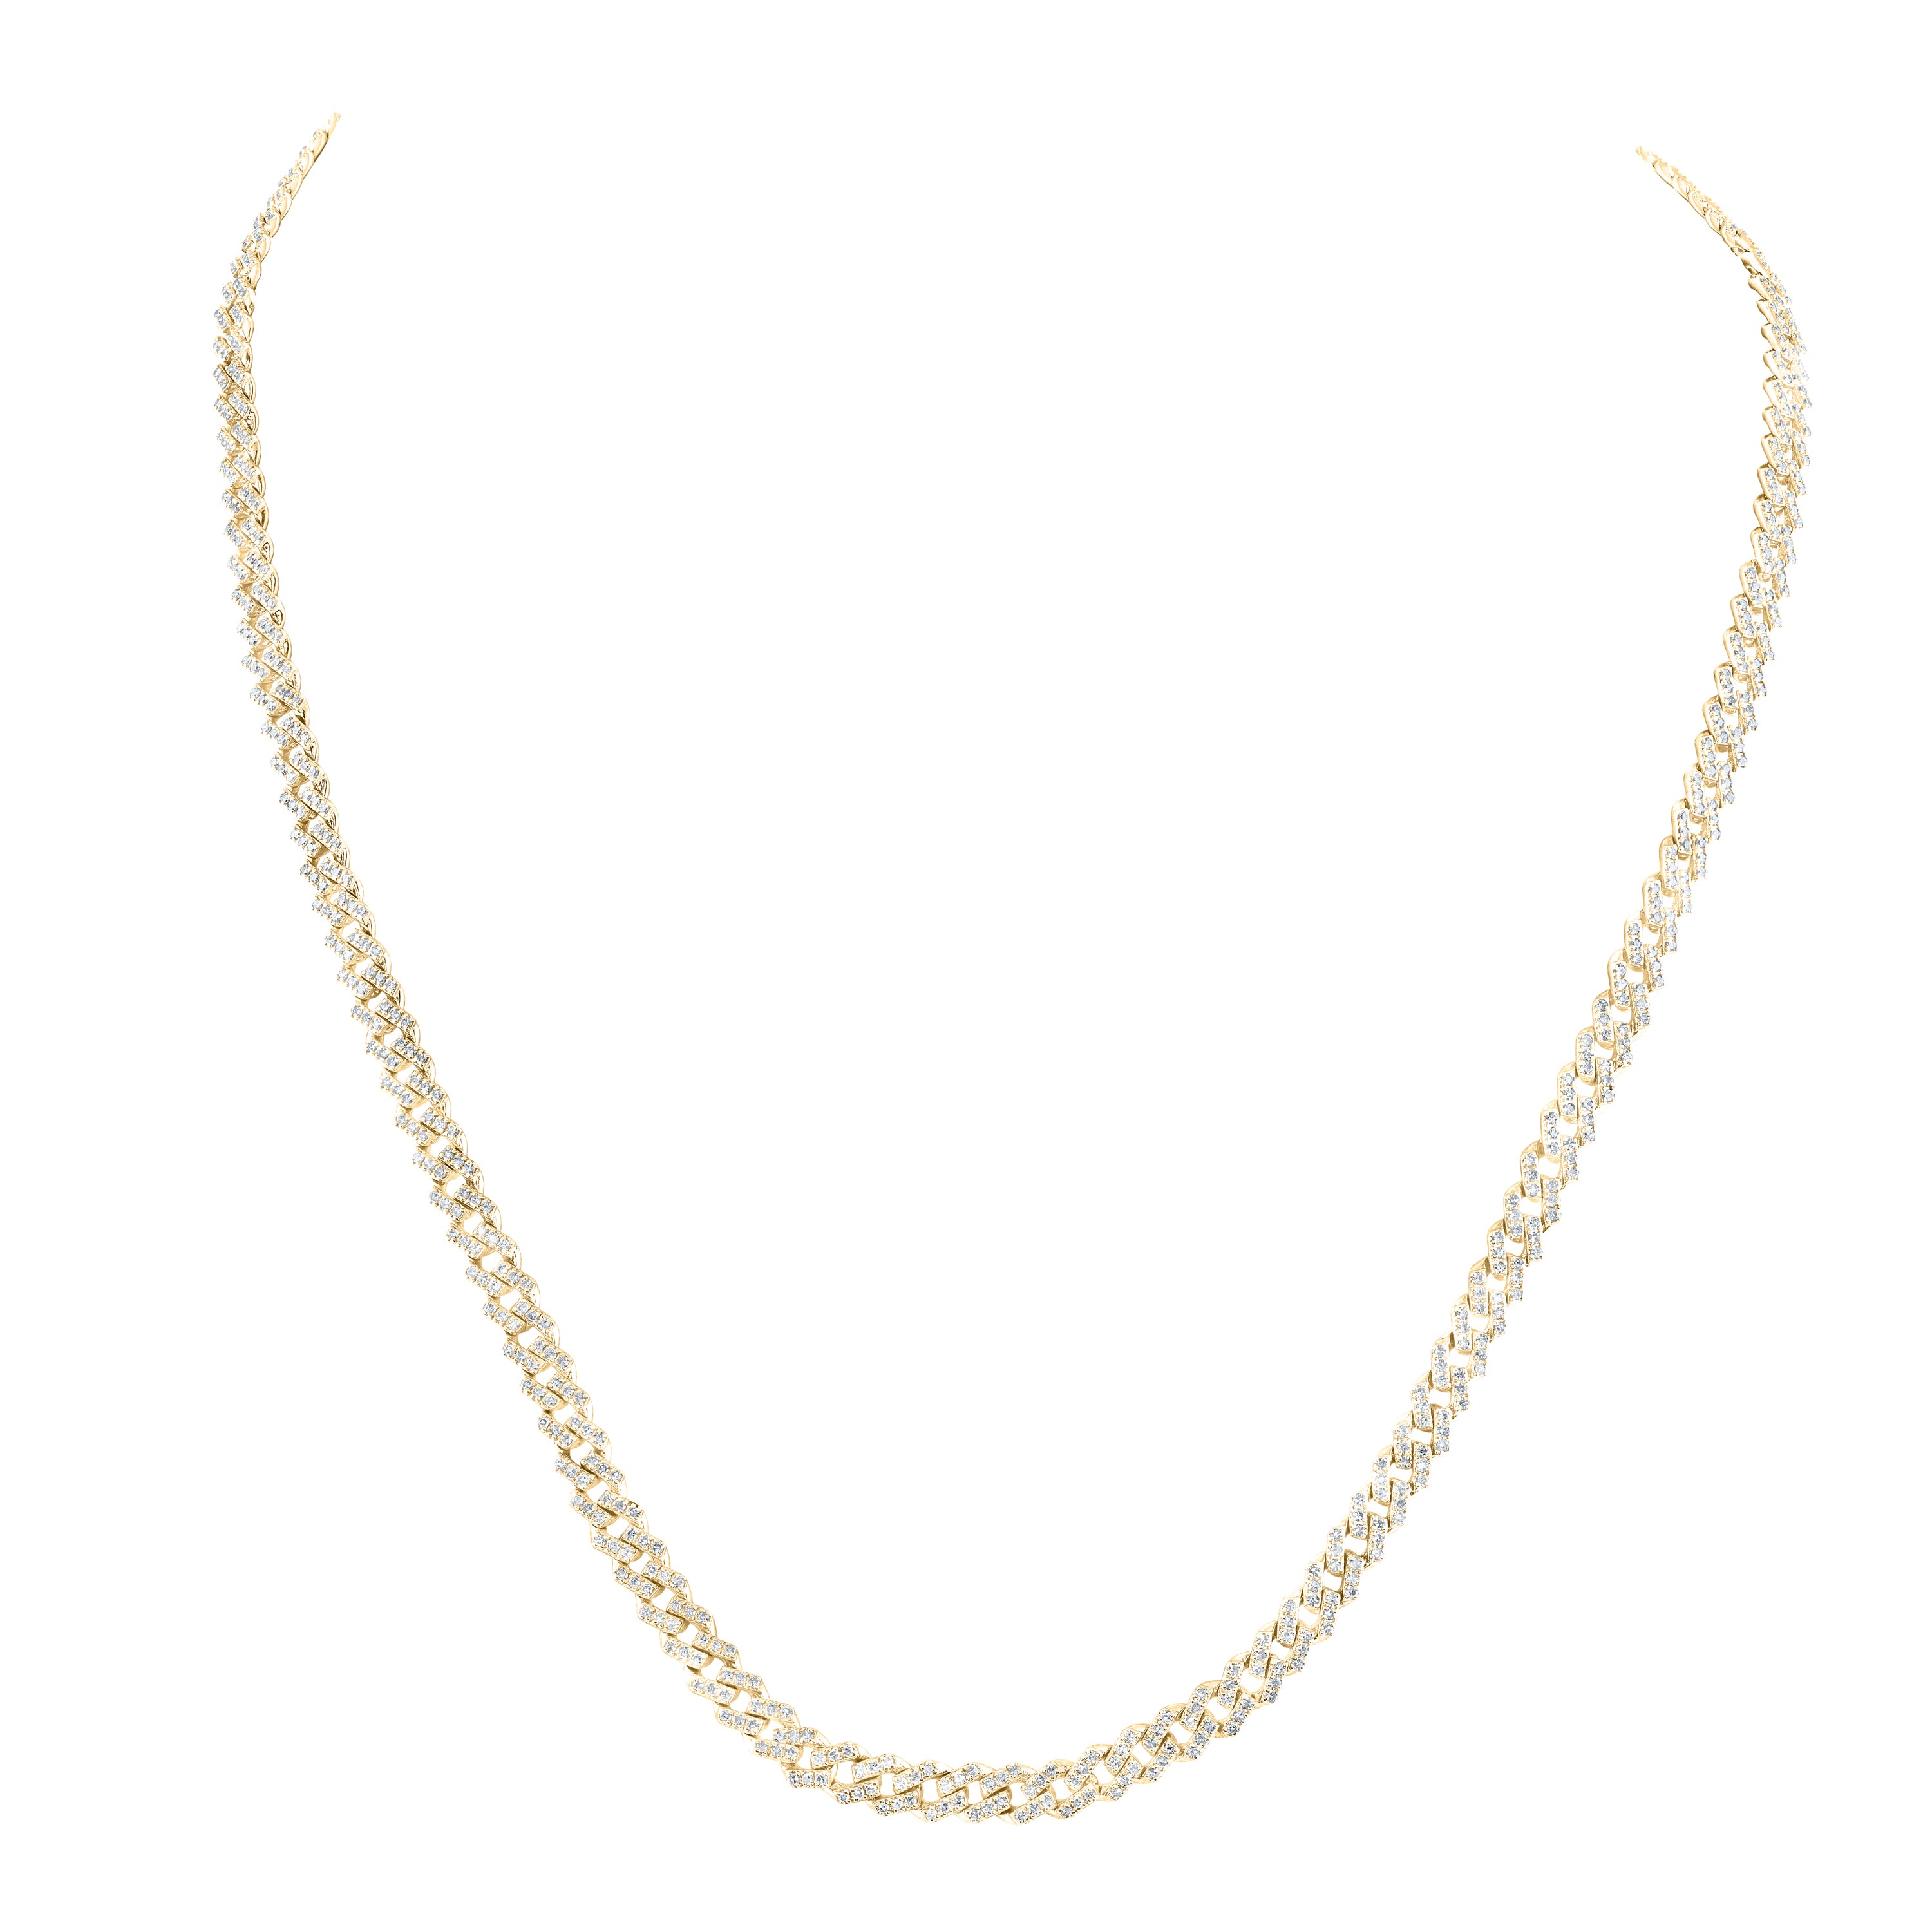 10Kt Yellow Gold 3 7/8Ctw-Dia Nk (5Mm) Mens Chain (20 Inch)